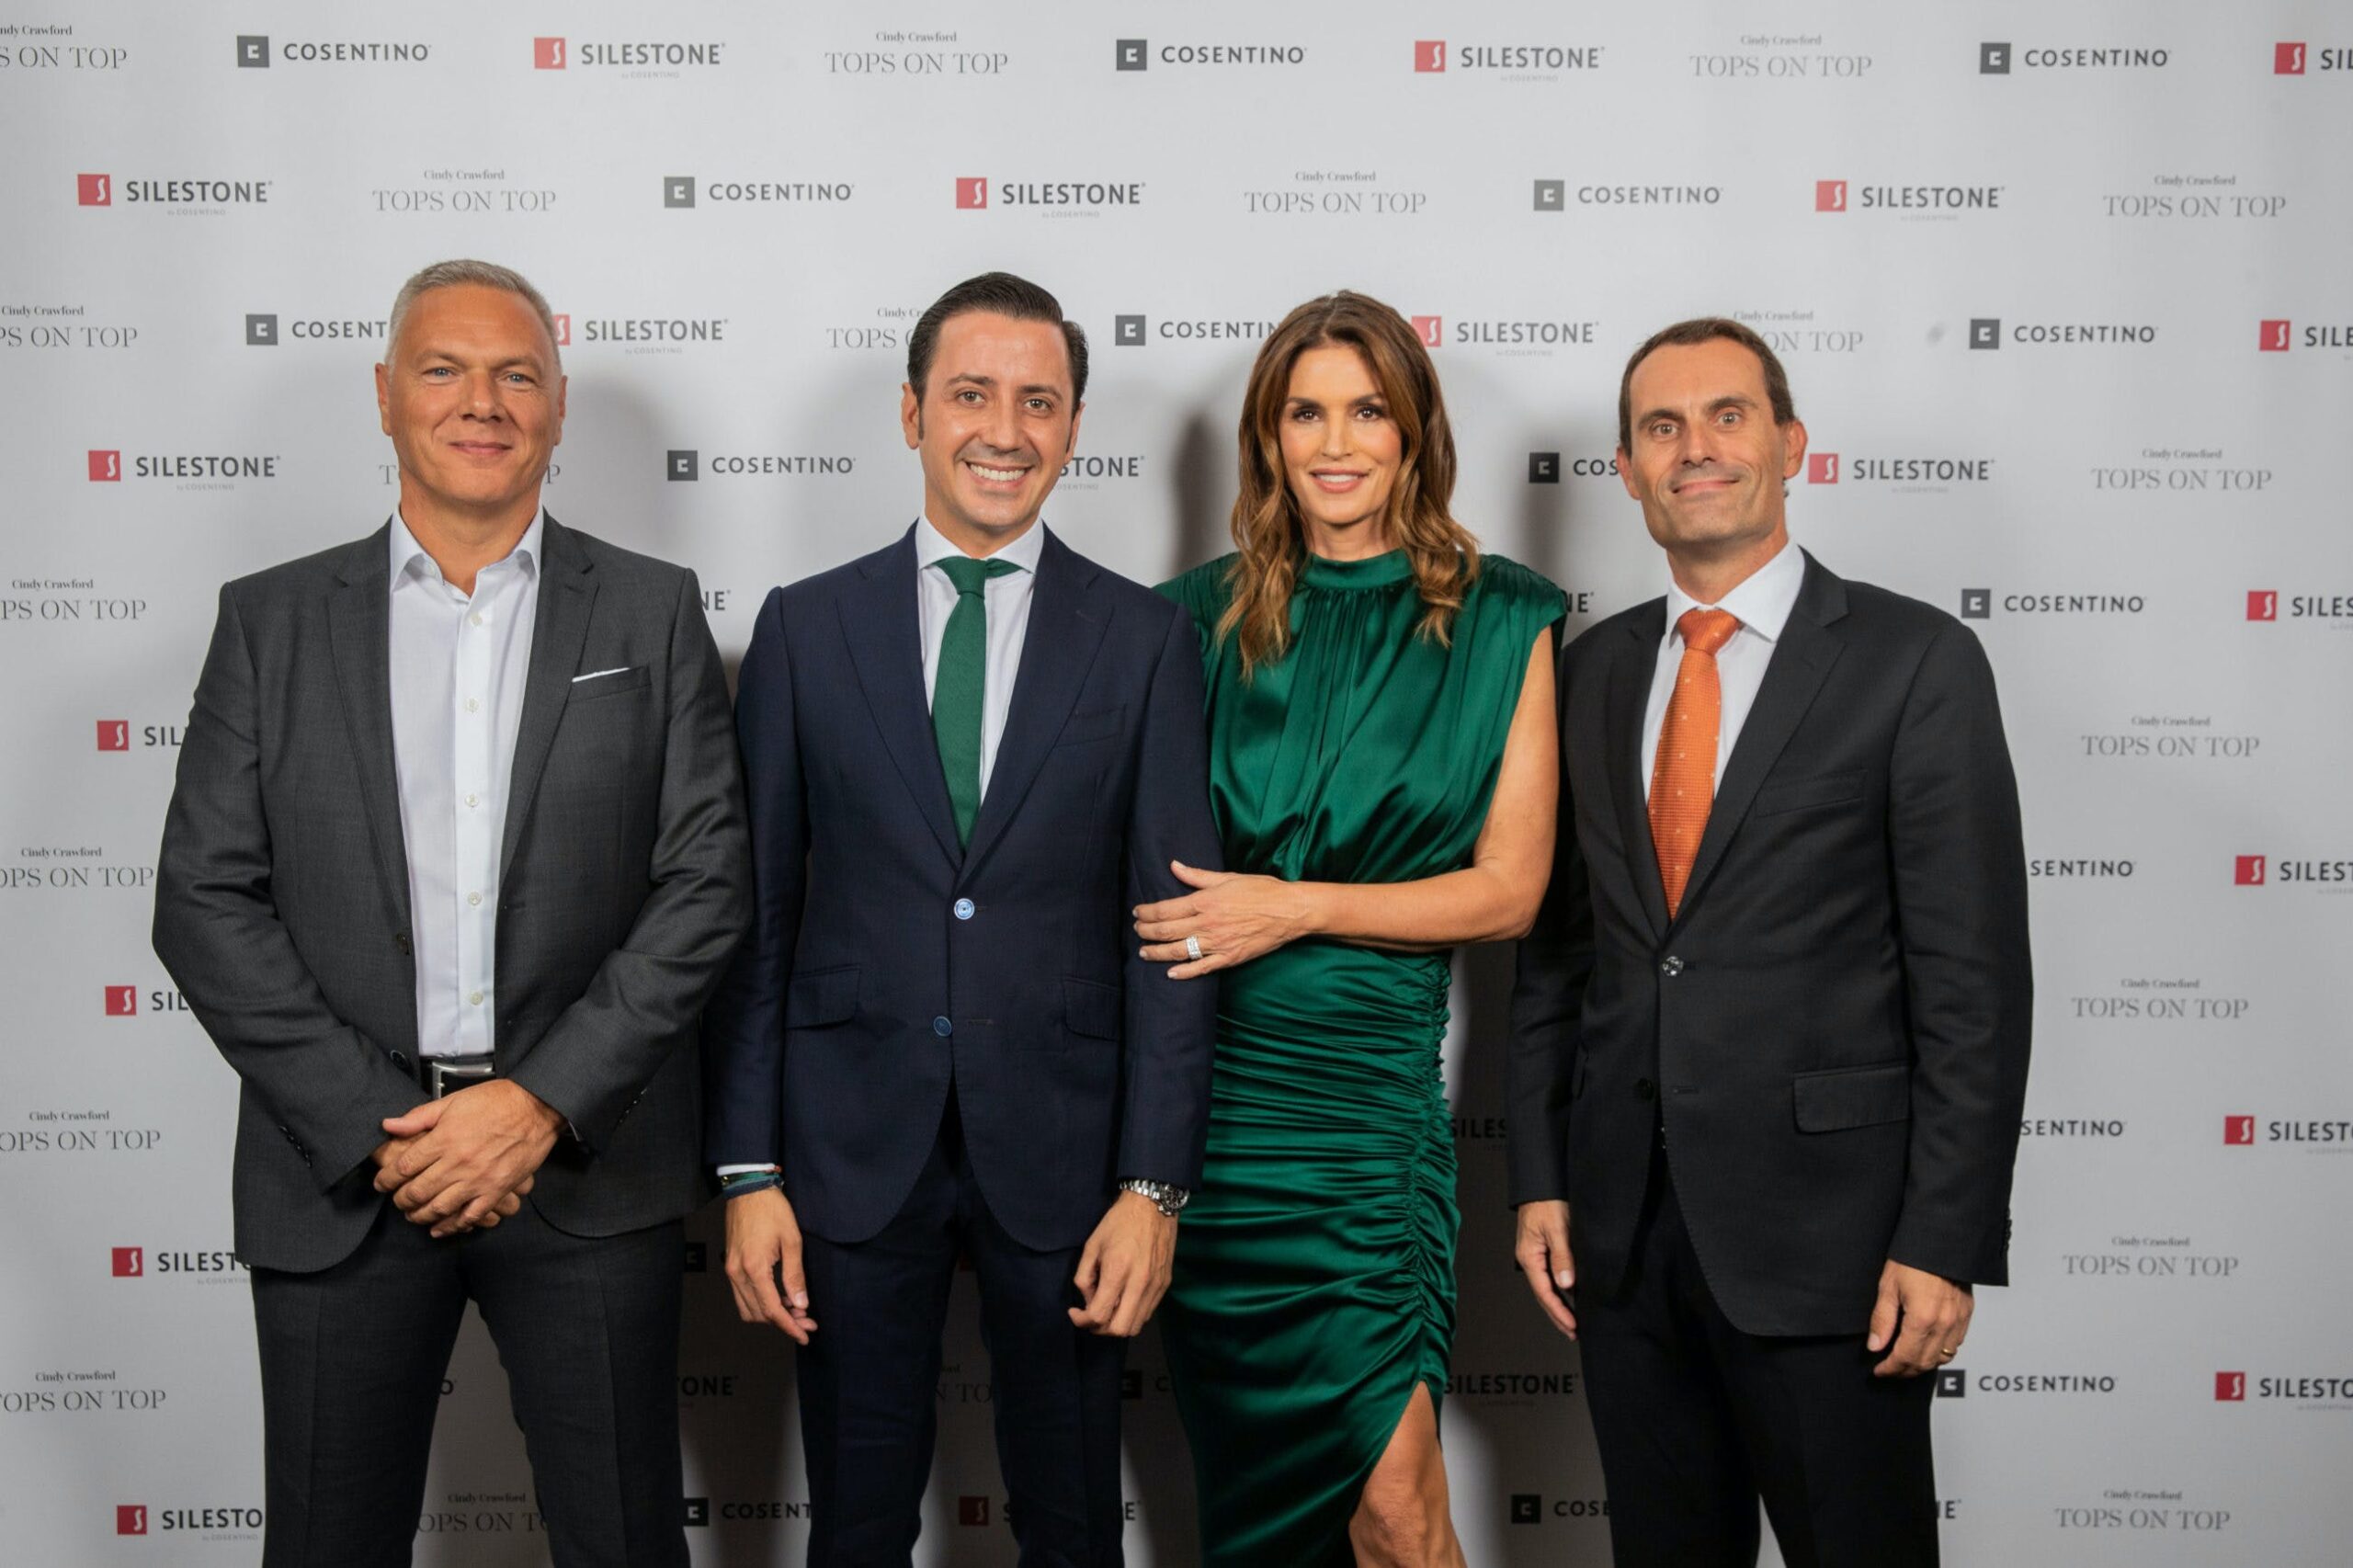 Image 35 of Paul Gidley Eduardo Cosentino Cindy Crawford Pedro Parra 3 scaled in Silestone® Presents its New "Tops on Top 2019" Campaign Featuring Cindy Crawford - Cosentino